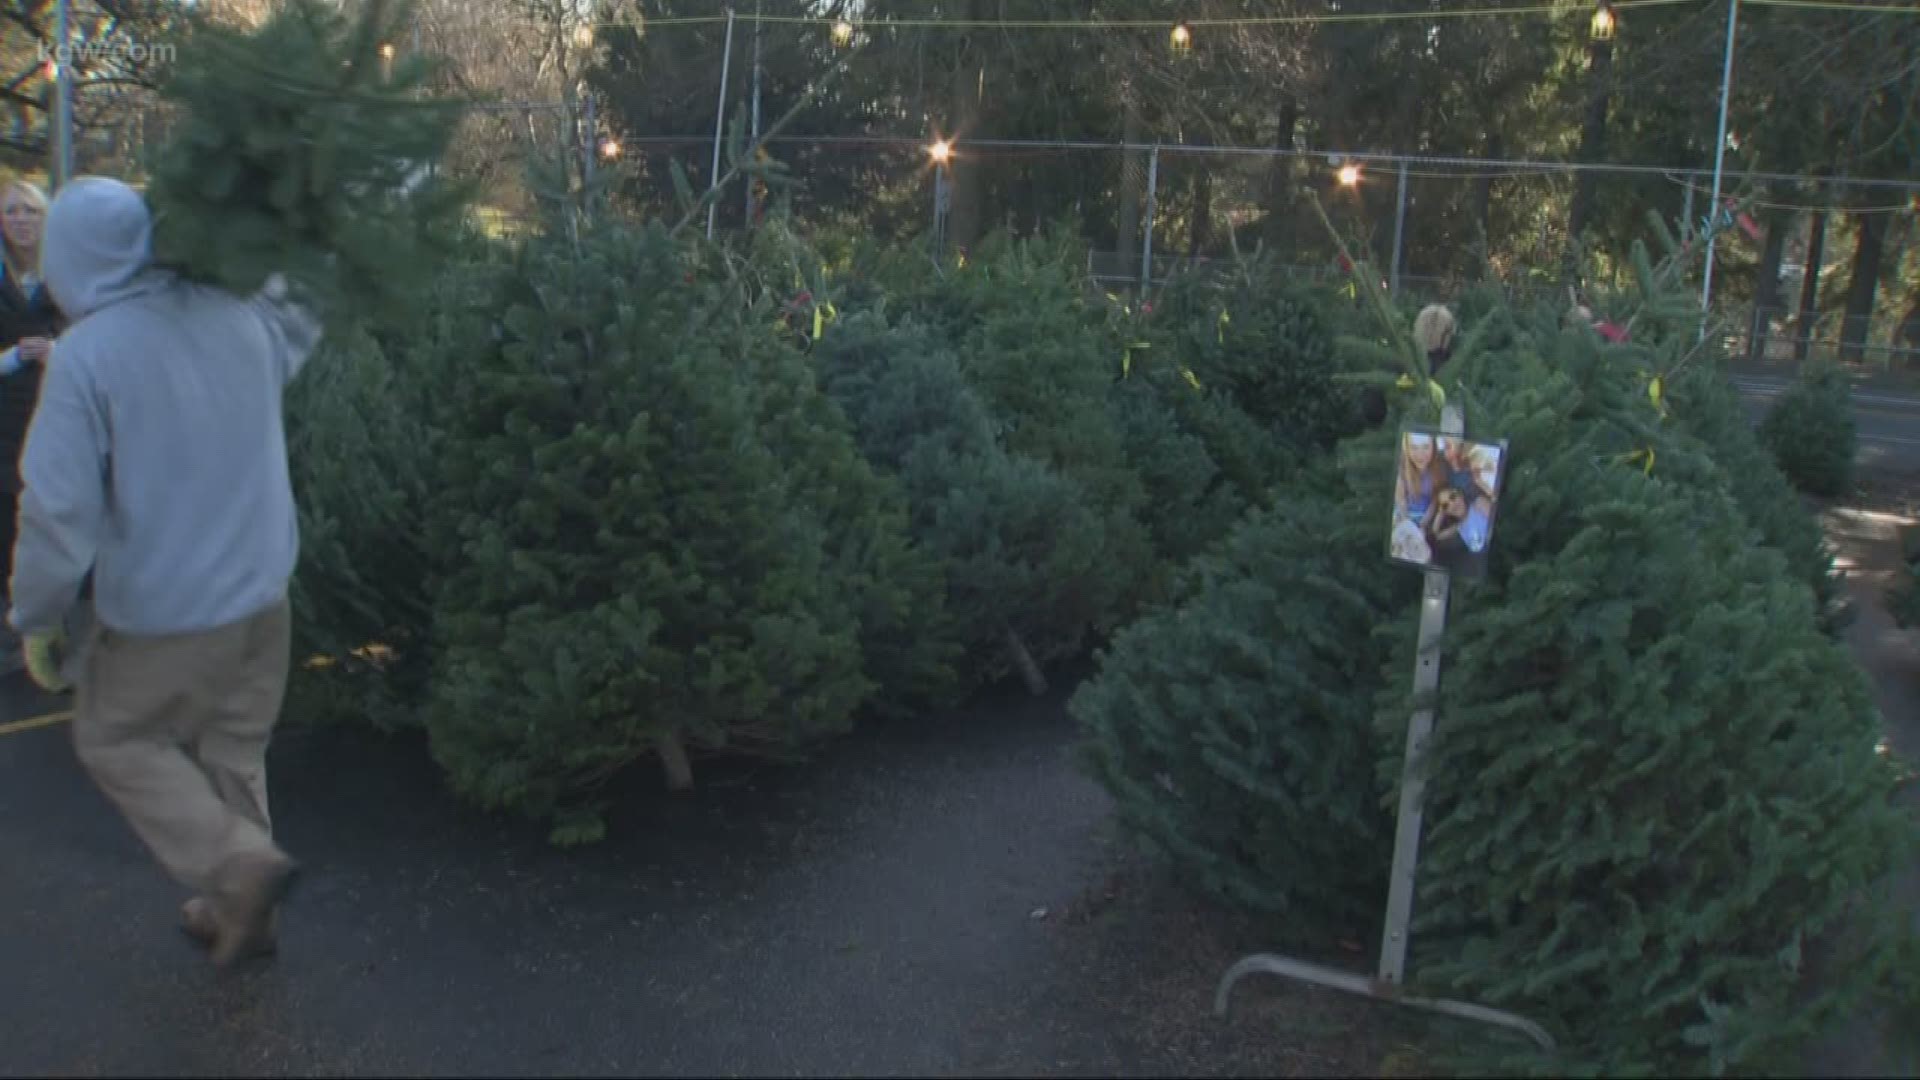 The Christmas tree shortage is affecting more than just buyers. How nonprofits are dealing with the lack of trees.